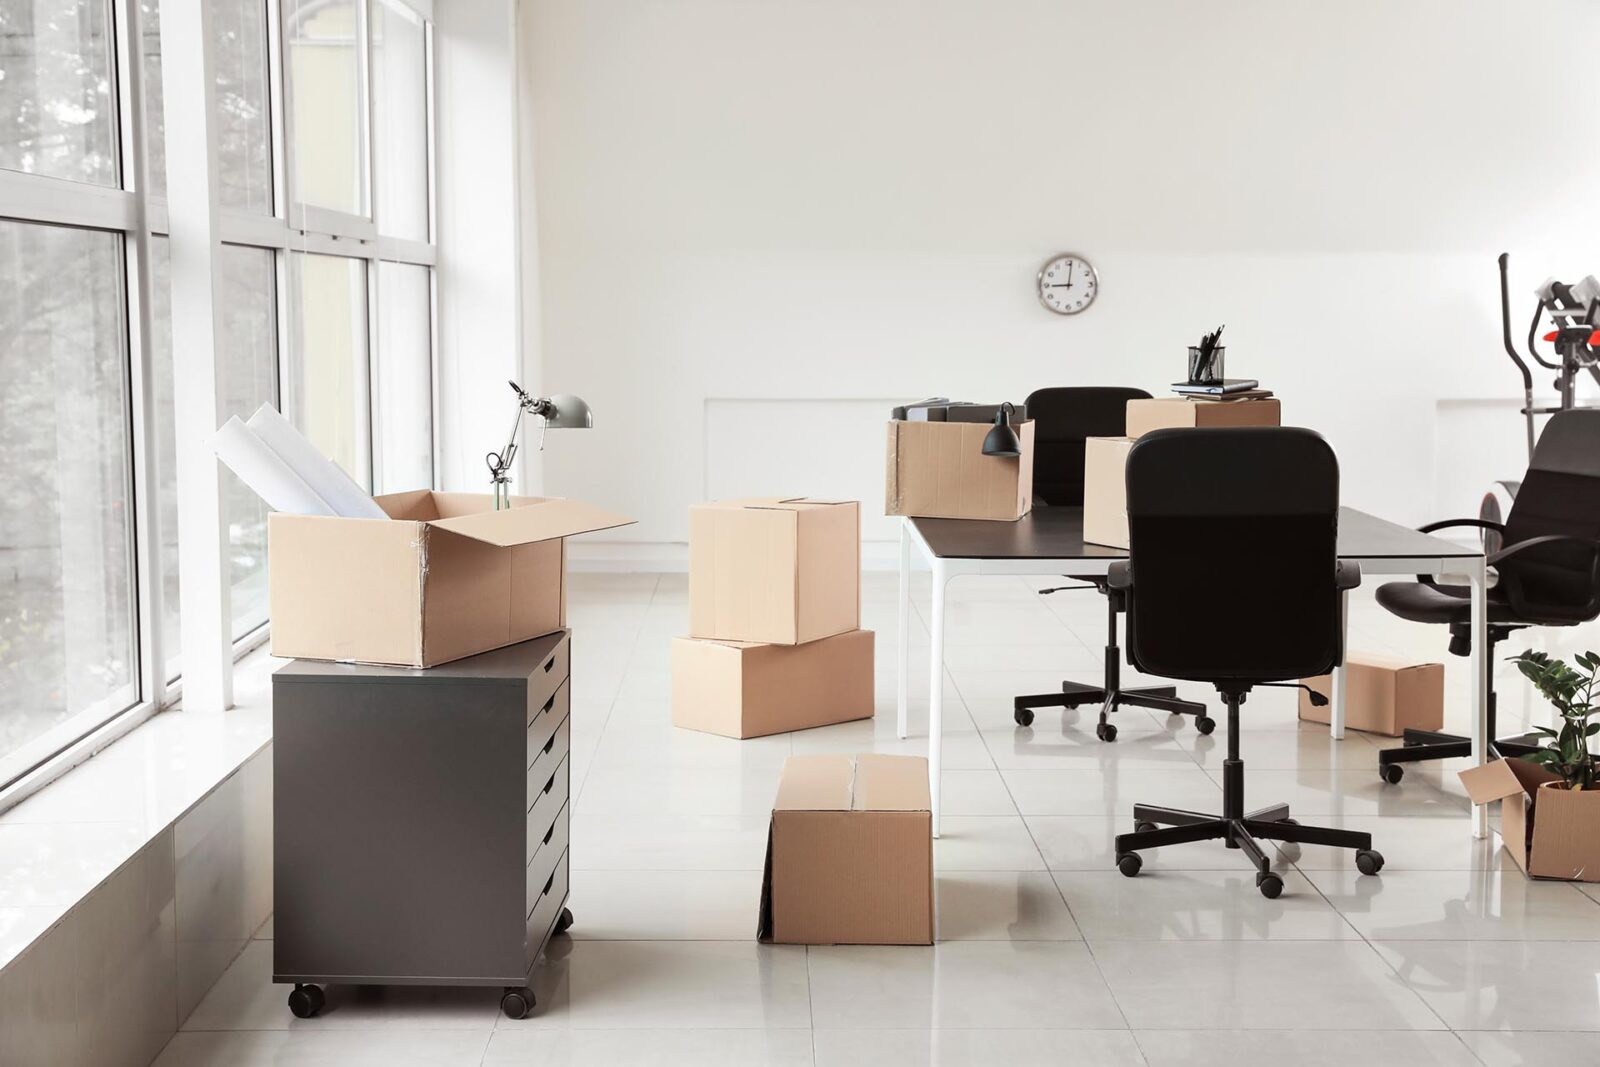 Cardboard,Boxes,With,Belongings,And,Furniture,In,New,Office,On